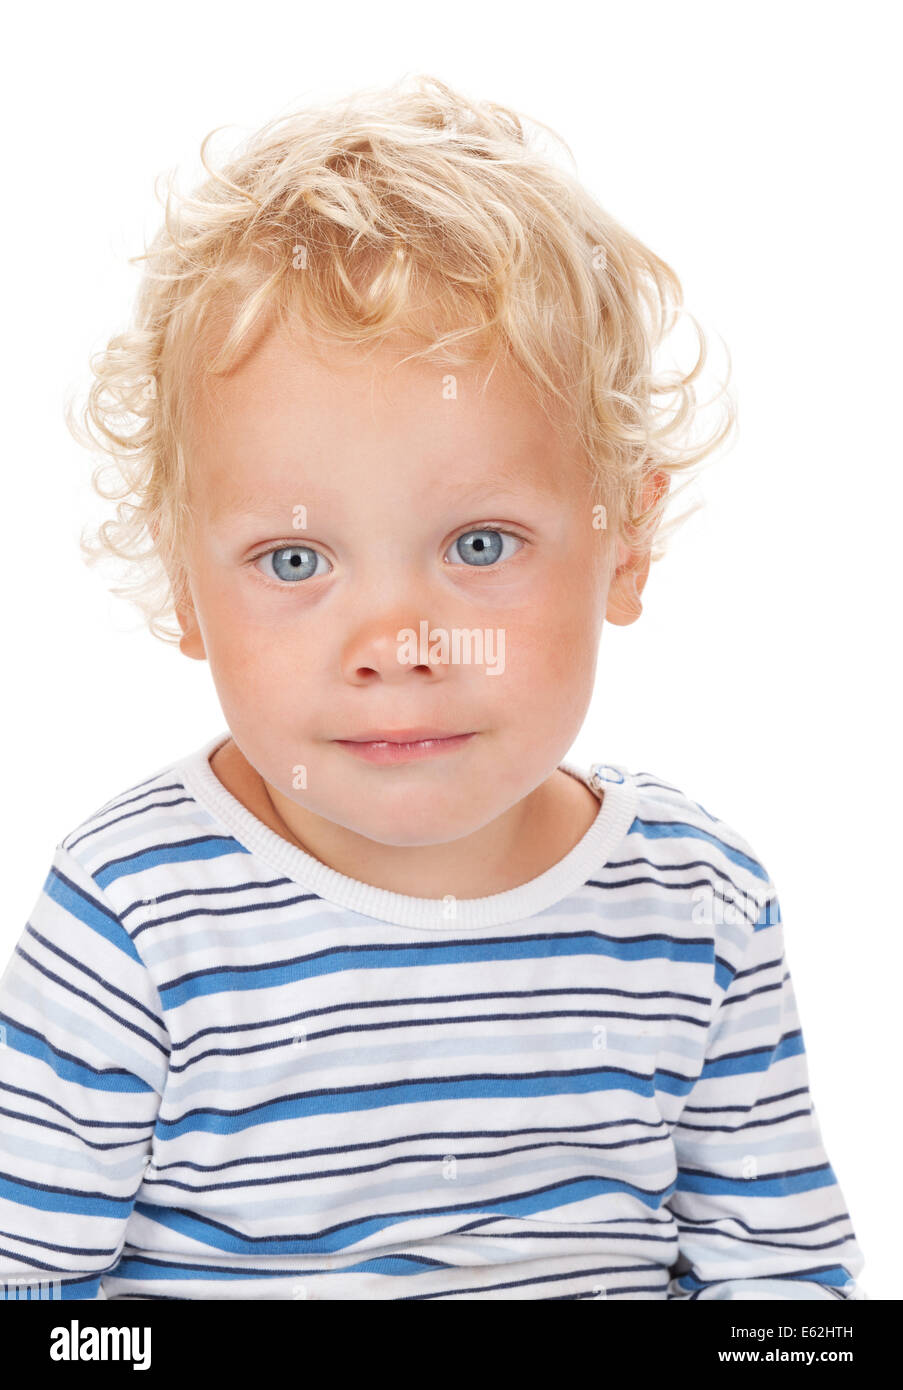 Baby With Blond Hair And Blue Eyes Stock Photos Baby With Blond